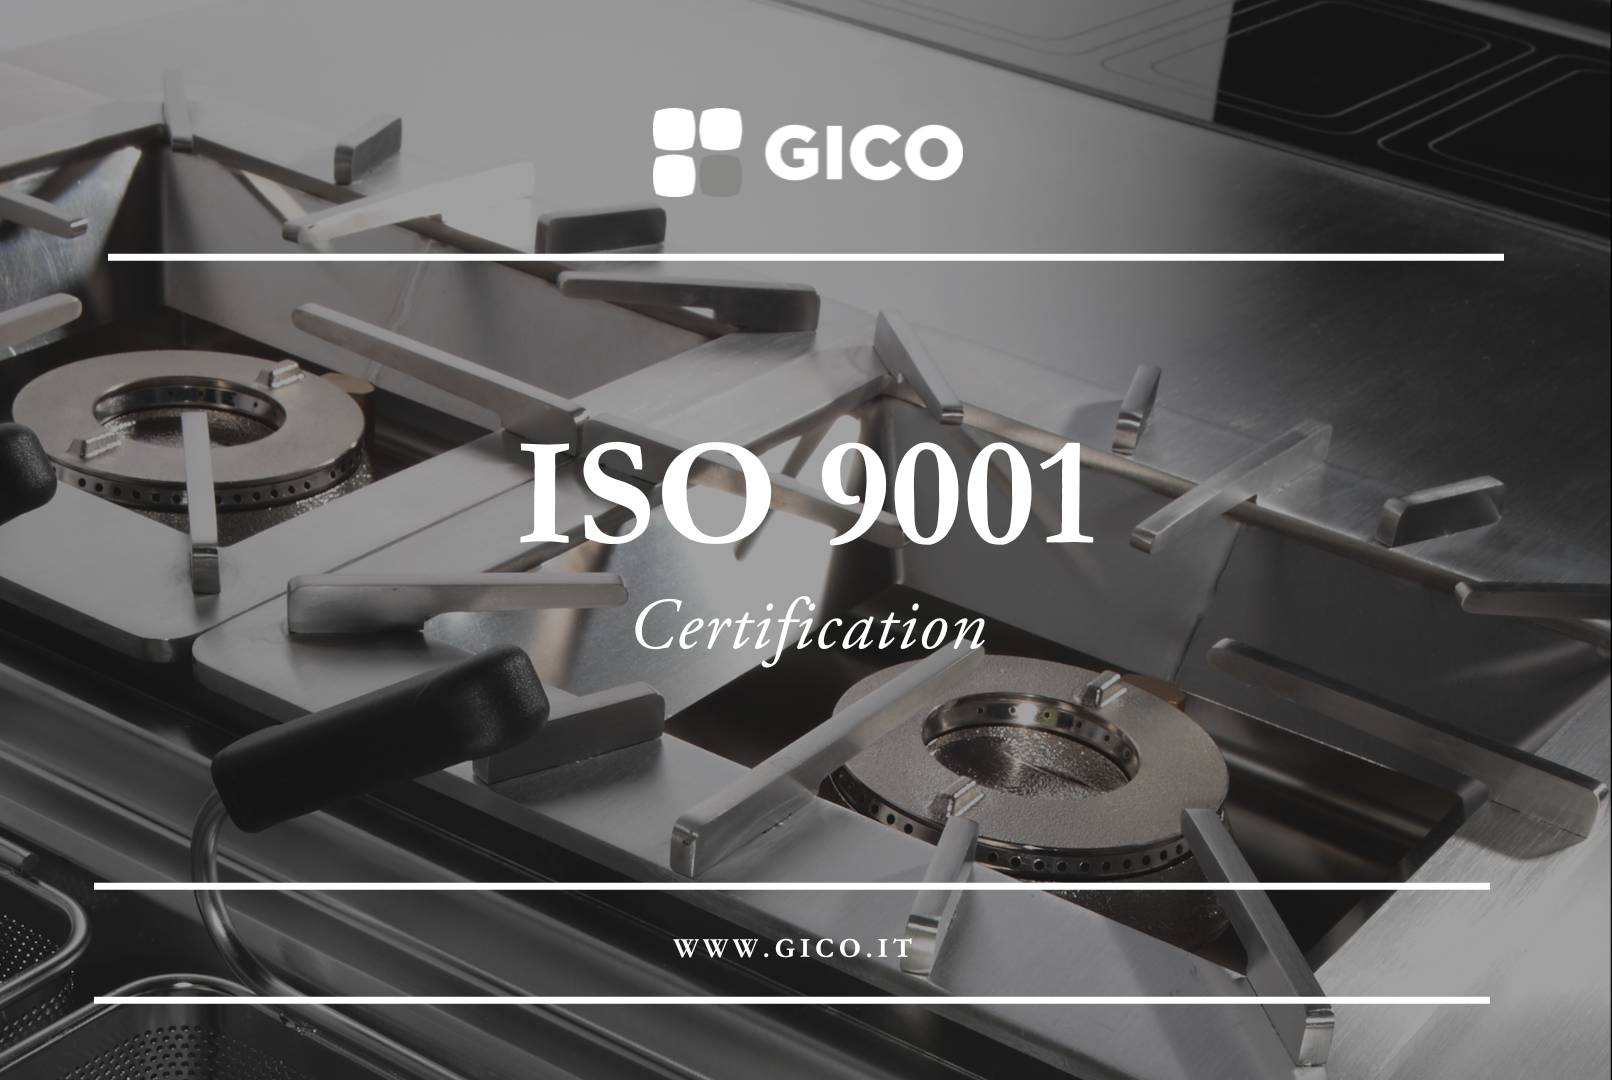 A GUARANTEE FOR CUSTOMER SATISFACTION GICO RENEWS ITS ISO 9001 CERTIFICATION